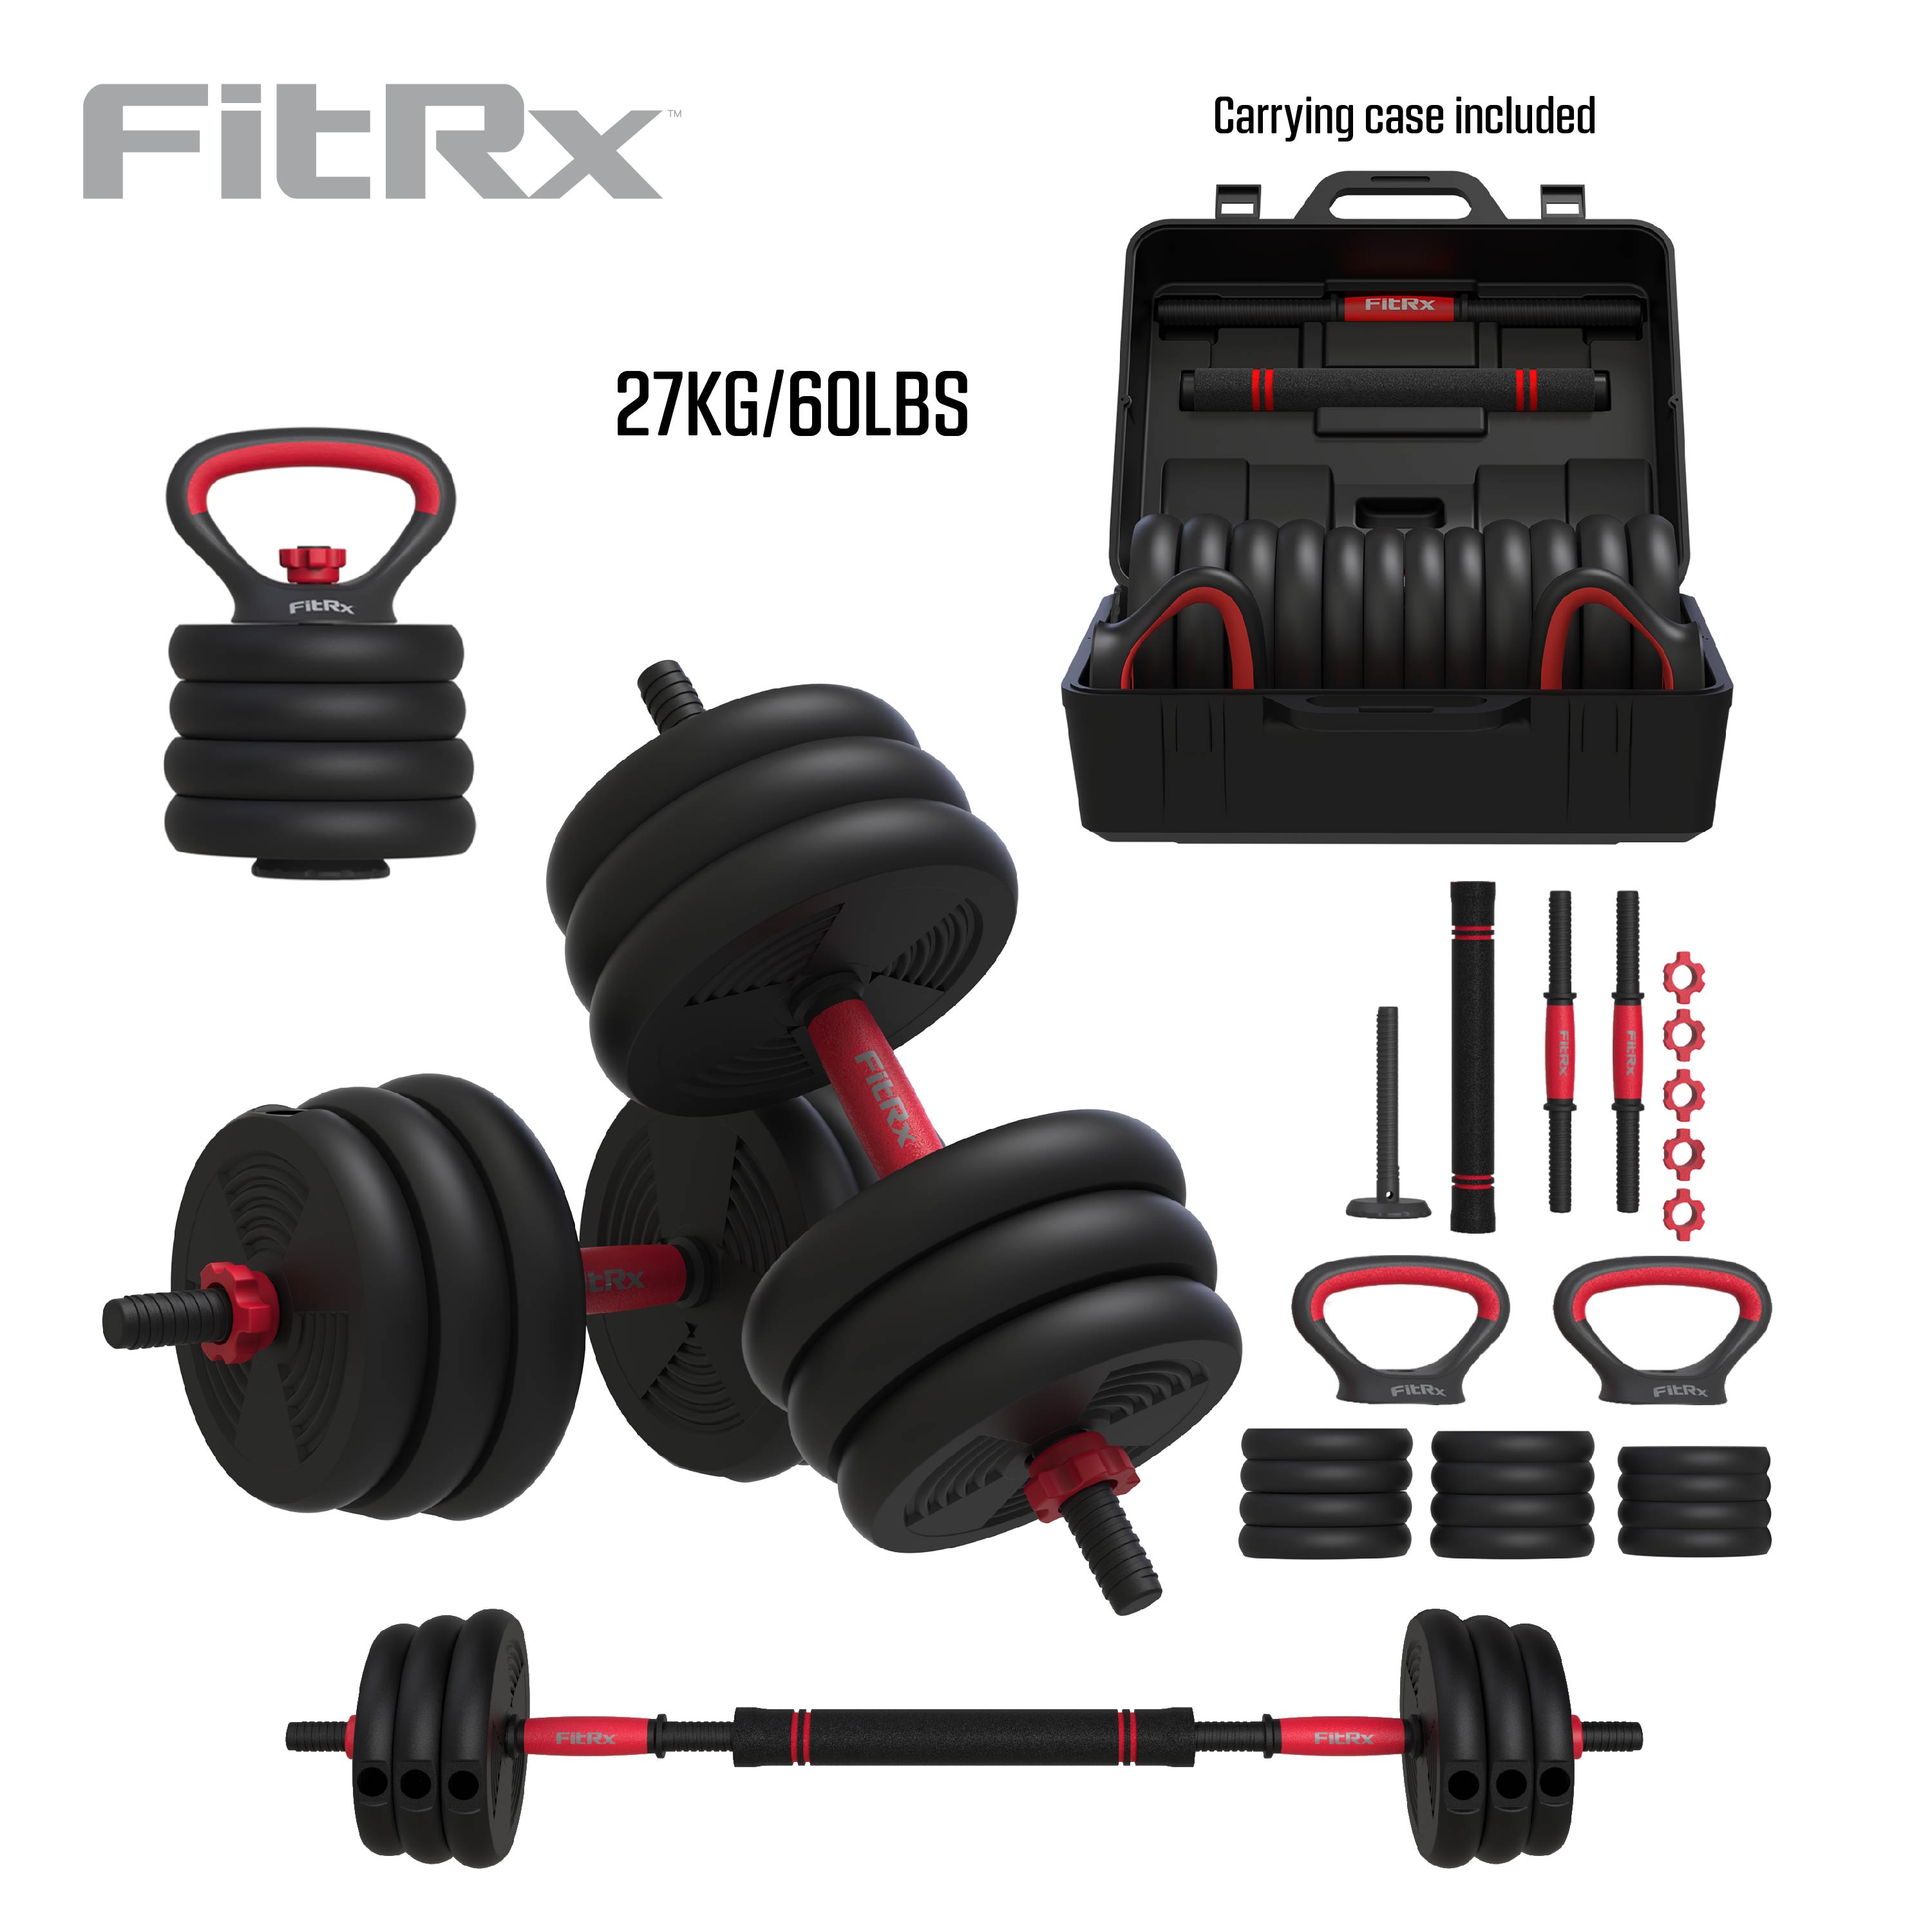 FitRx SmartBell Gym, 60 lbs. 4-in-1 Adjustable Interchangeable Dumbbell, Barbell, and Kettlebell Weight Set, Black - image 1 of 14